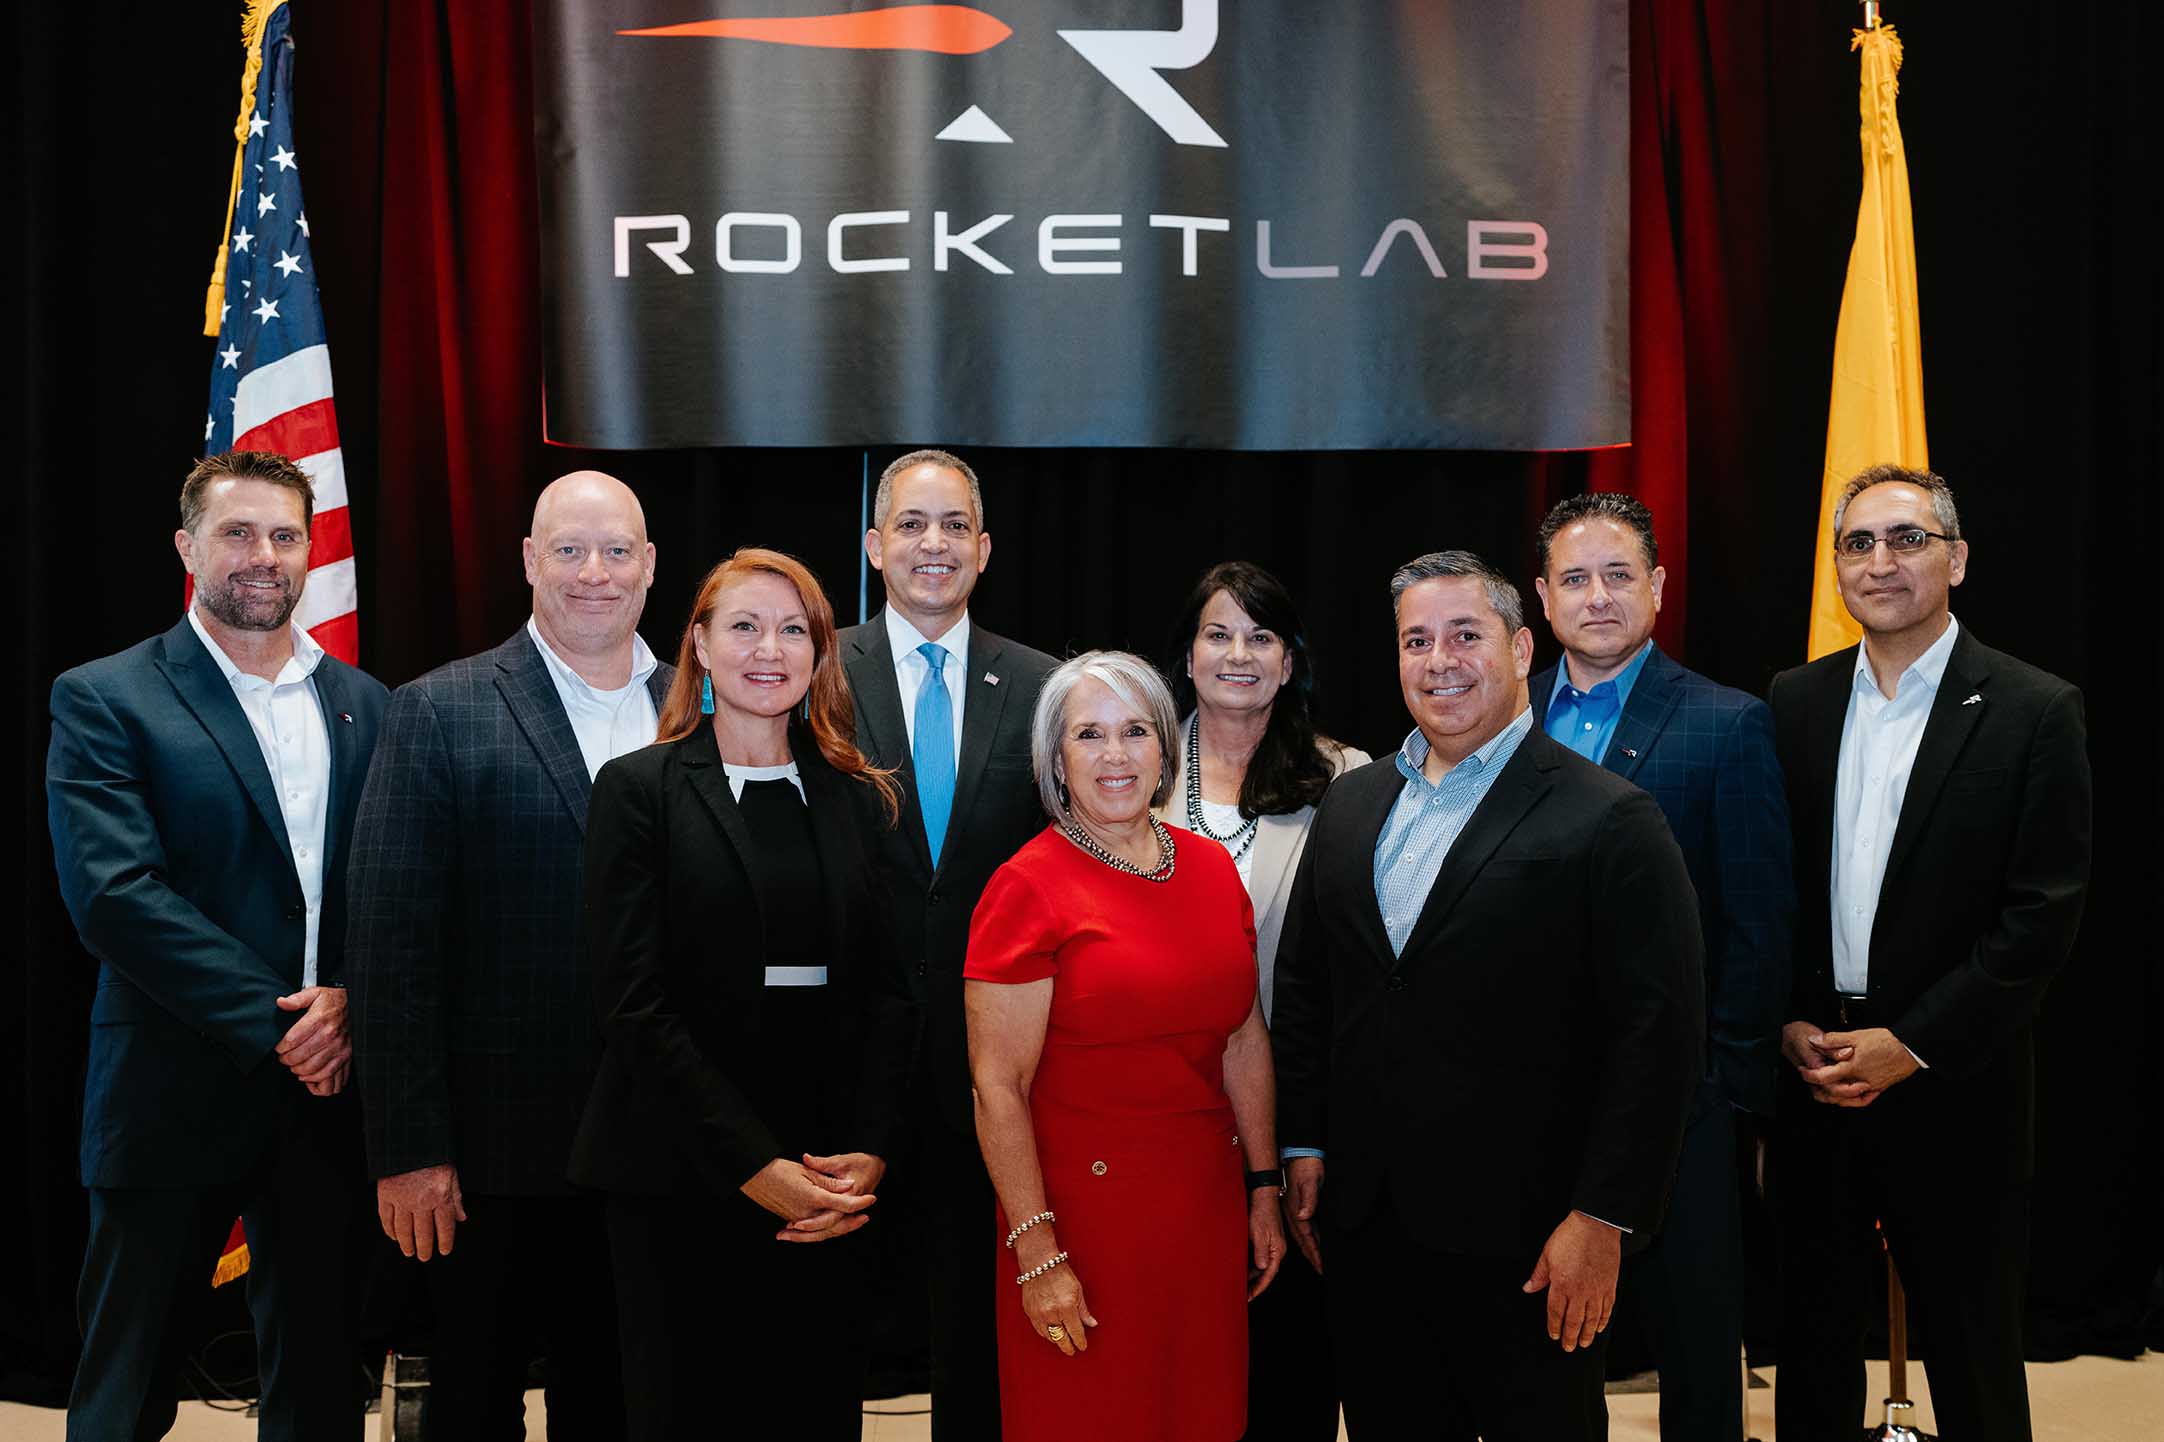 Rocket Lab Celebrates CHIPS Act Funding Preliminary Agreement in Albuquerque